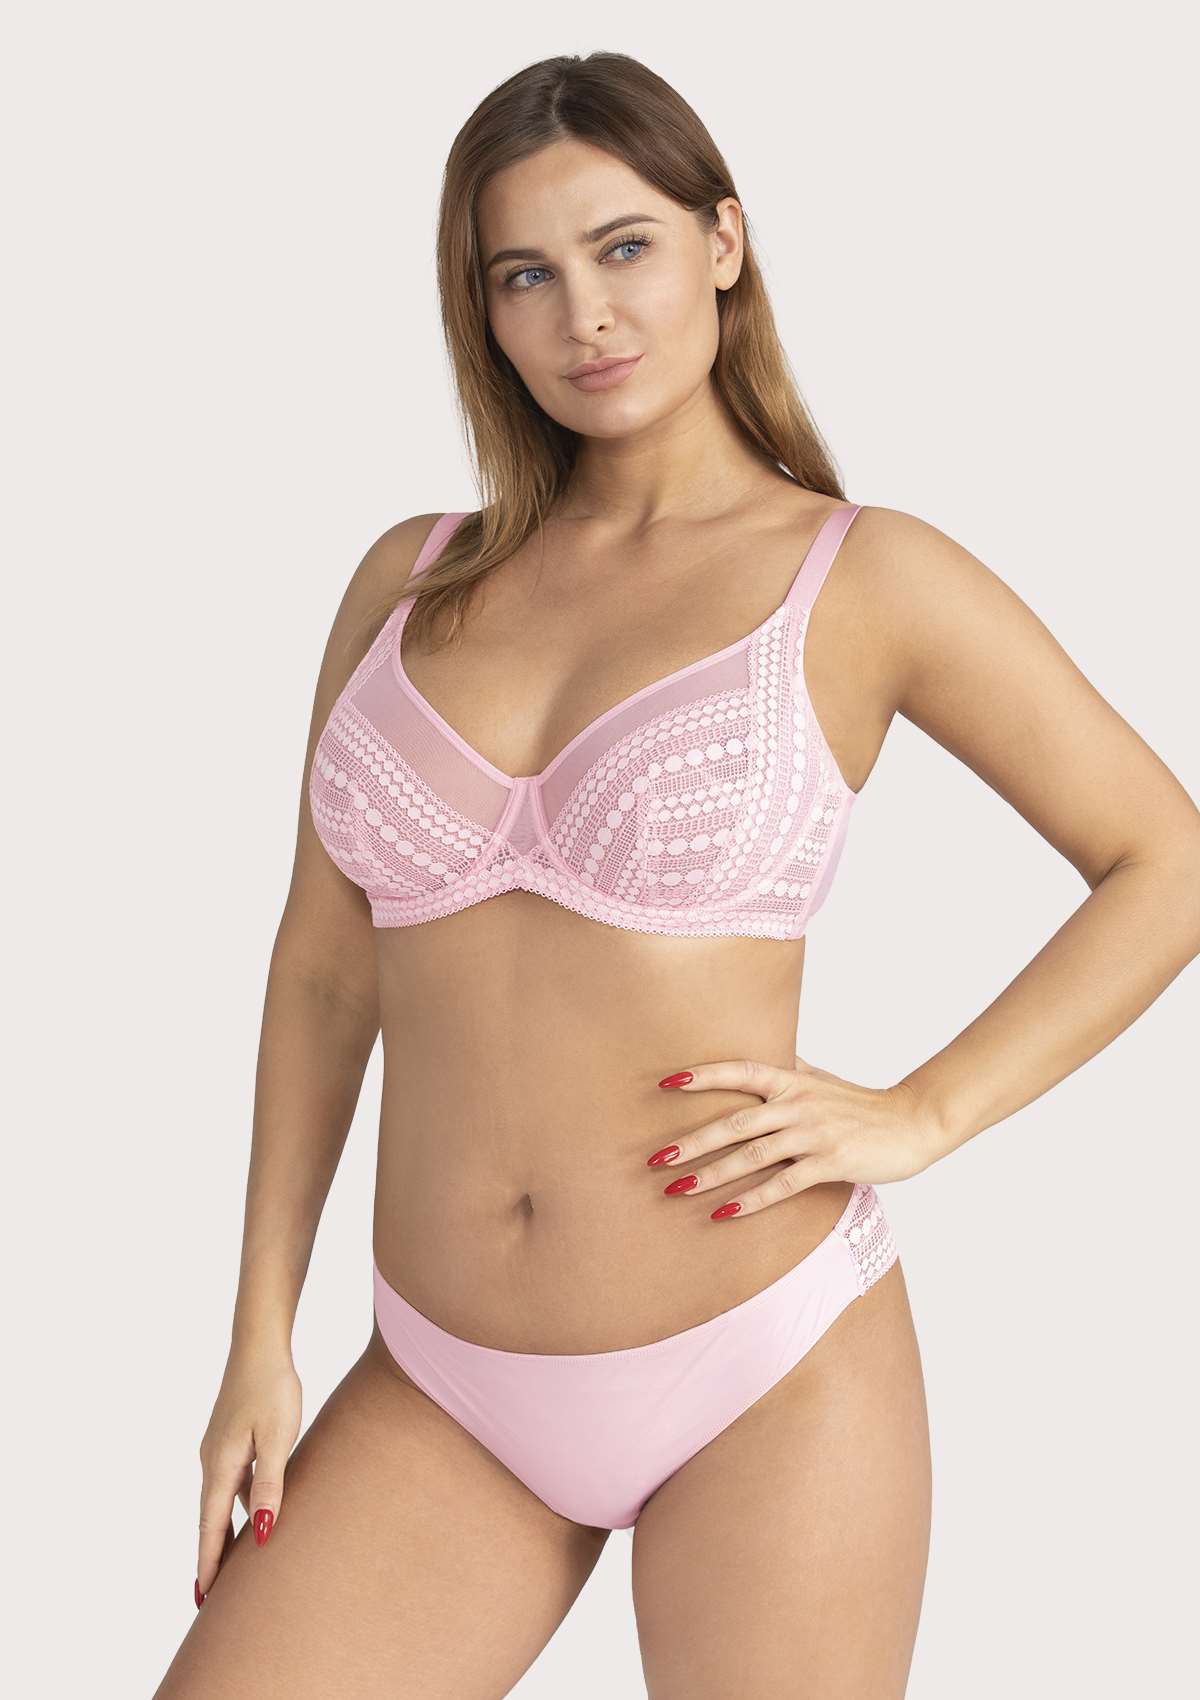 HSIA Heroine Lace Bra And Panties Set: Most Comfortable Supportive Bra - Pink / 42 / DD/E